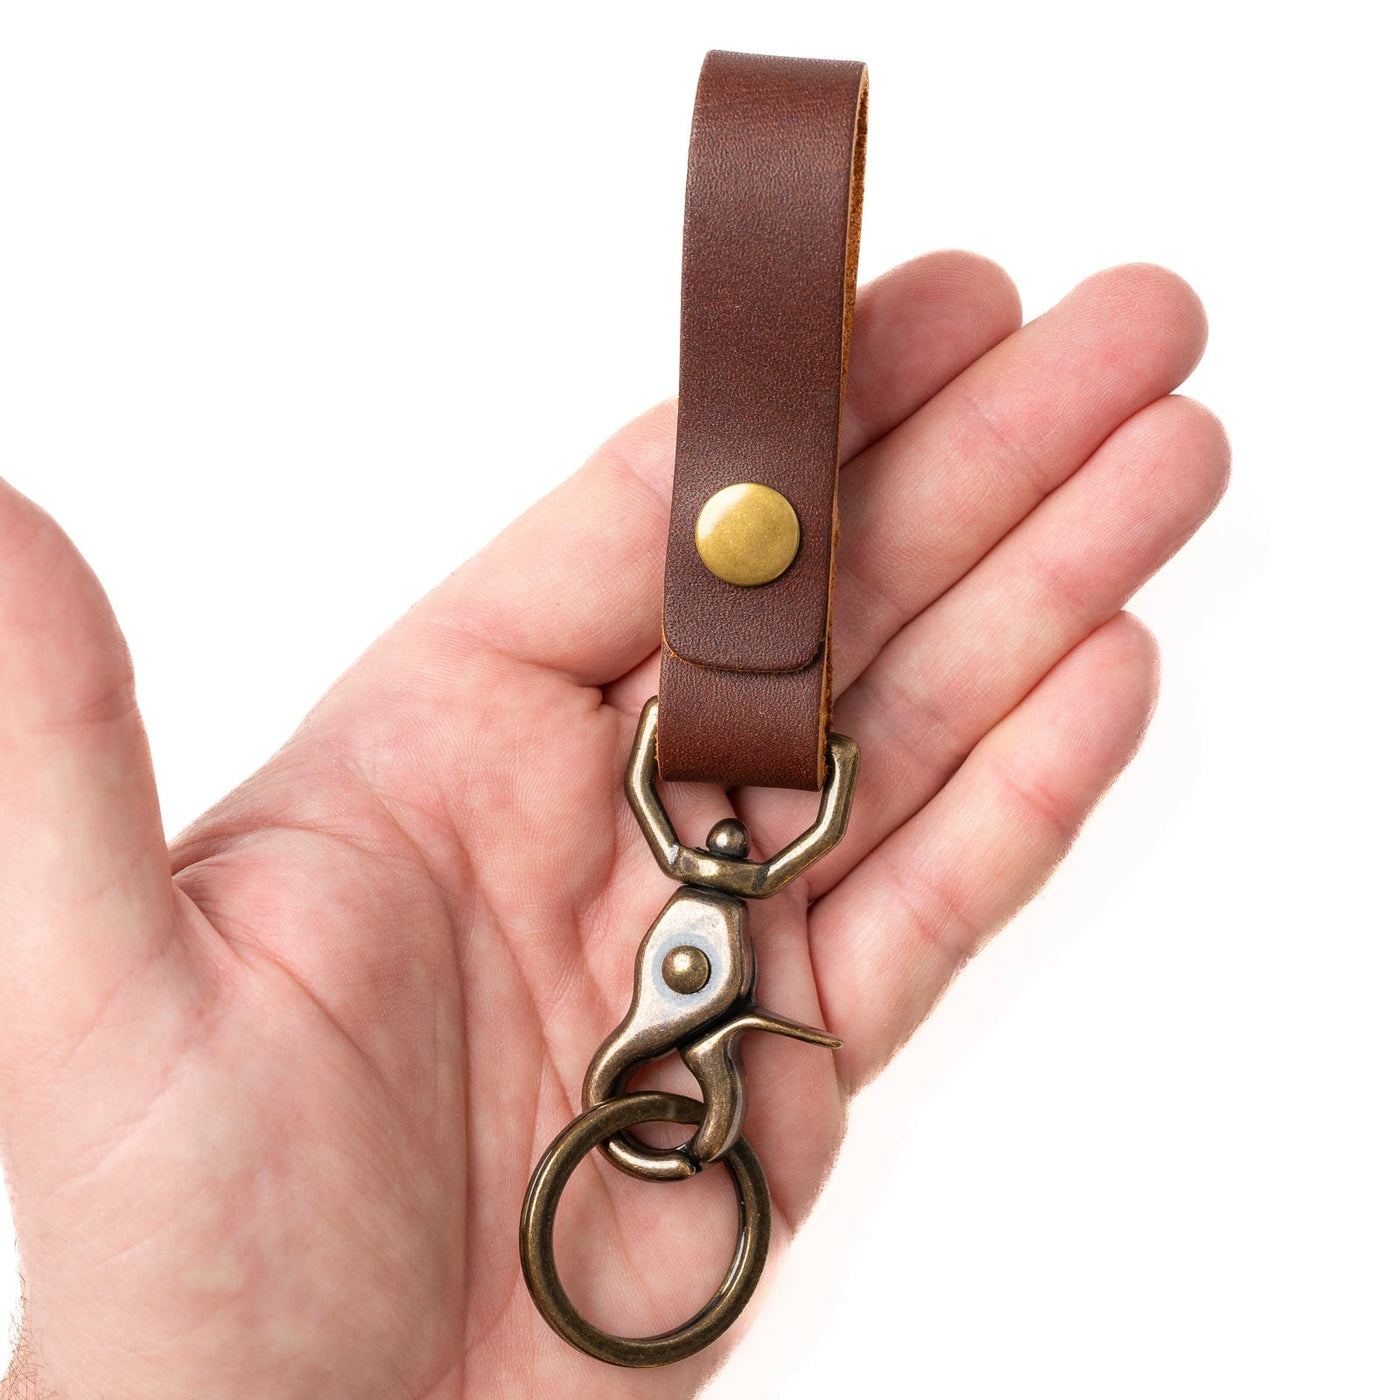 Leather Keychain Wallet – brown